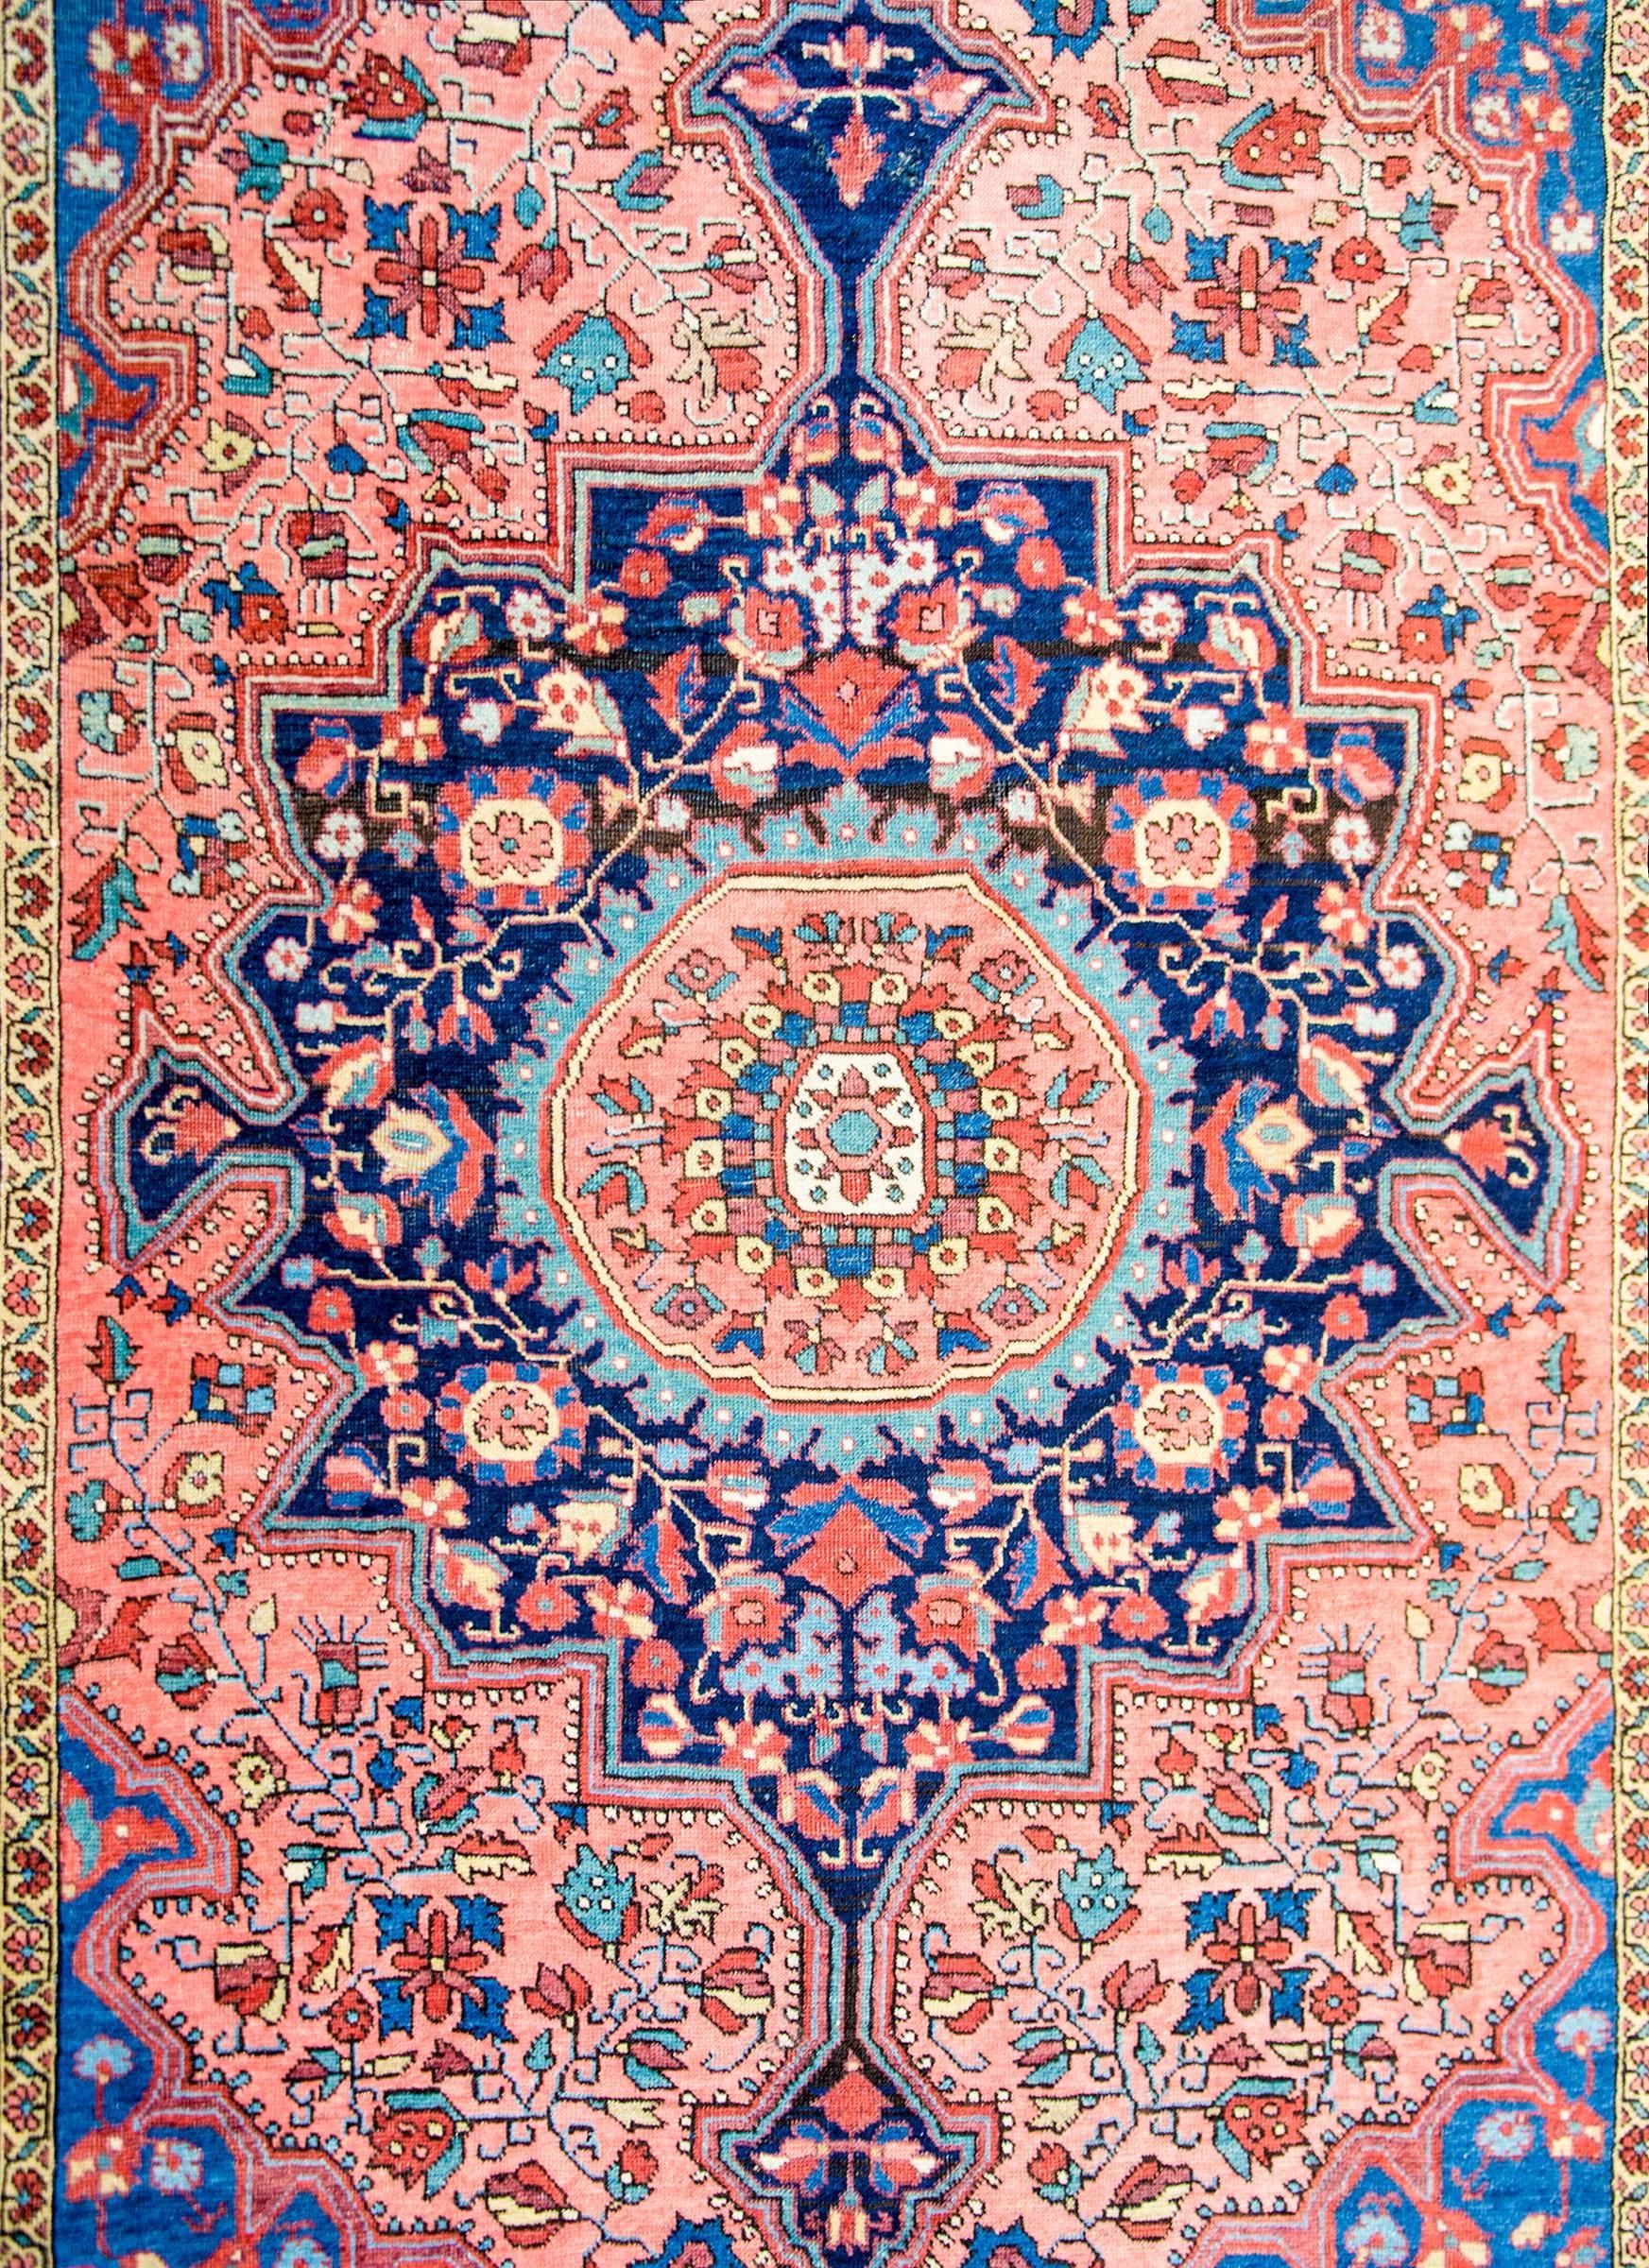 A wonderful early 20th century Persian Sarouk Farahan rug with an expertly rendered and densely woven central medallion containing a pattern of intertwining vines, leaves, and flowers woven in beautiful indigo, salmon, crimson, and gold yellow